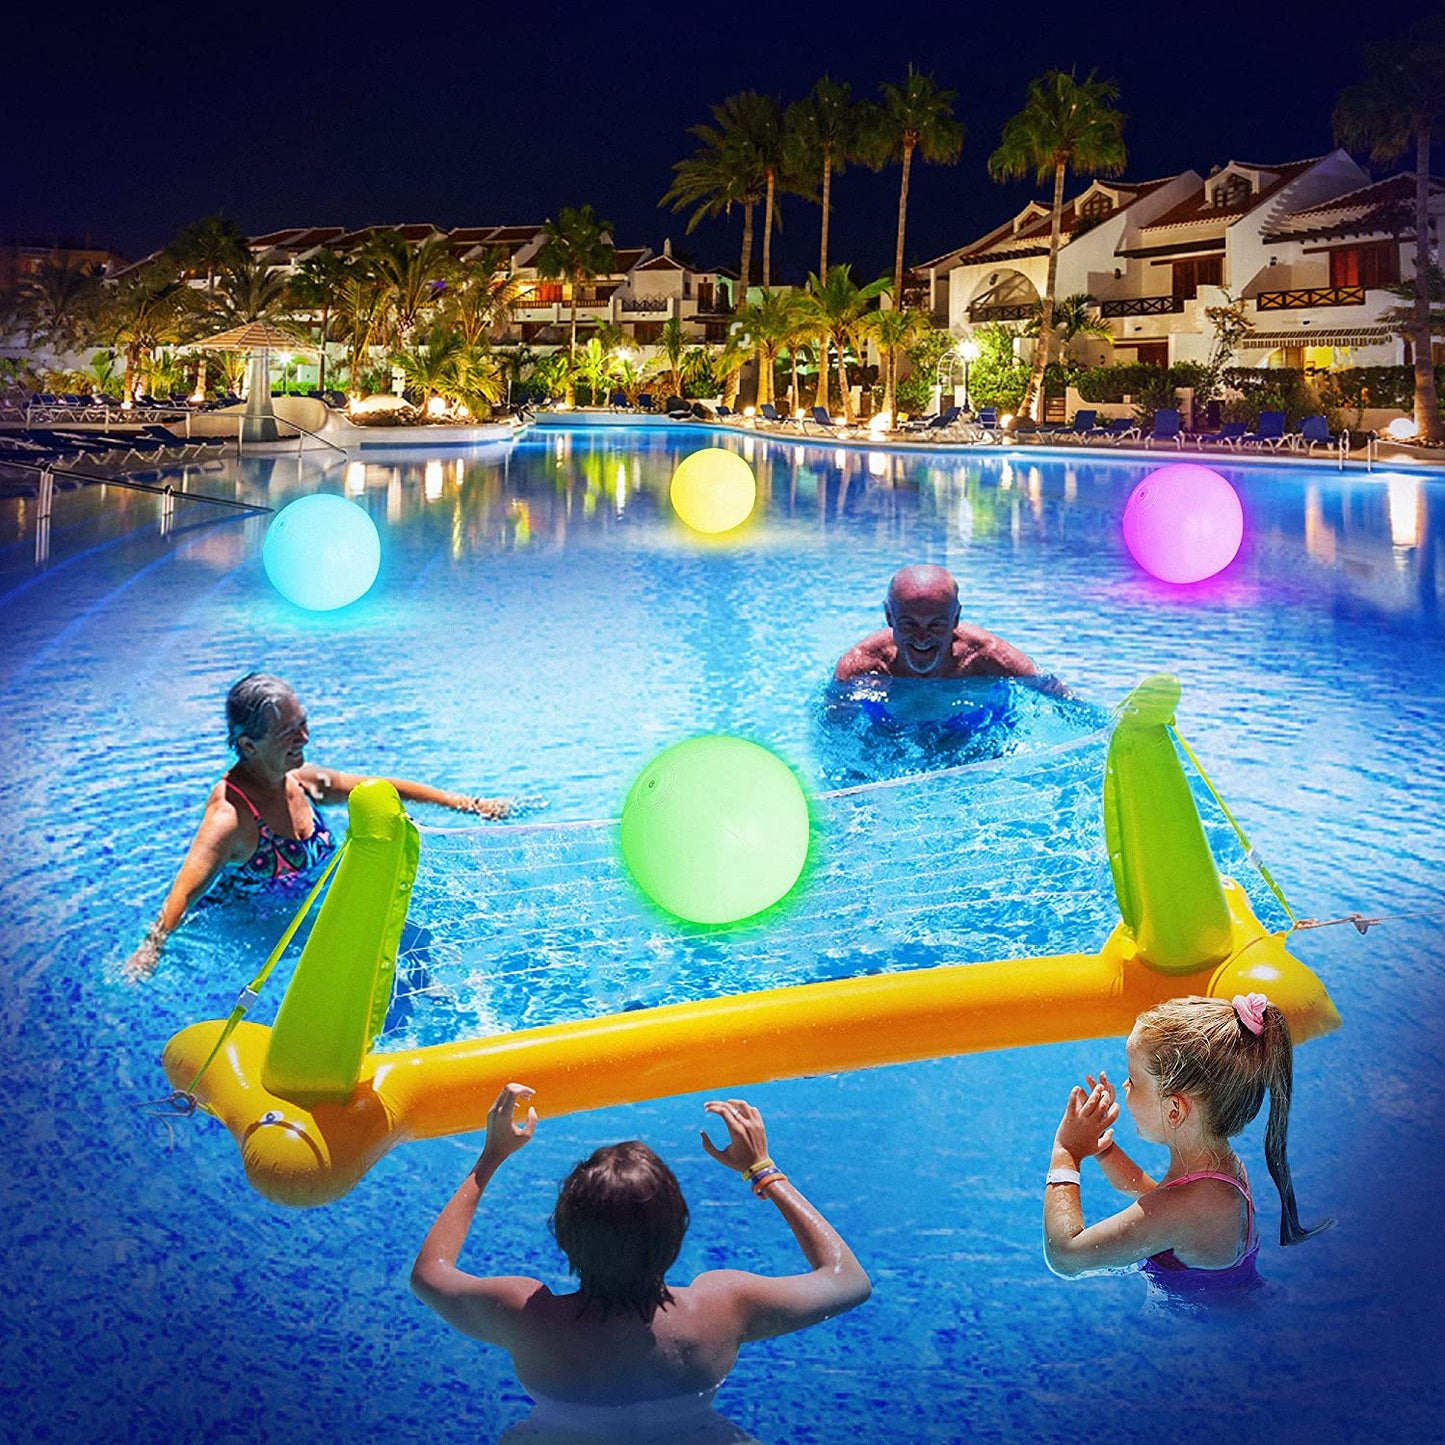 Pool Toys - 4 Pack Light up Beach Balls for Kids W/ 8 Light Modes, Pool Beach Games Balls for Outdoor or Indoor Activities, Glow in the Dark Pool Beach Decorations for Kids and Adults